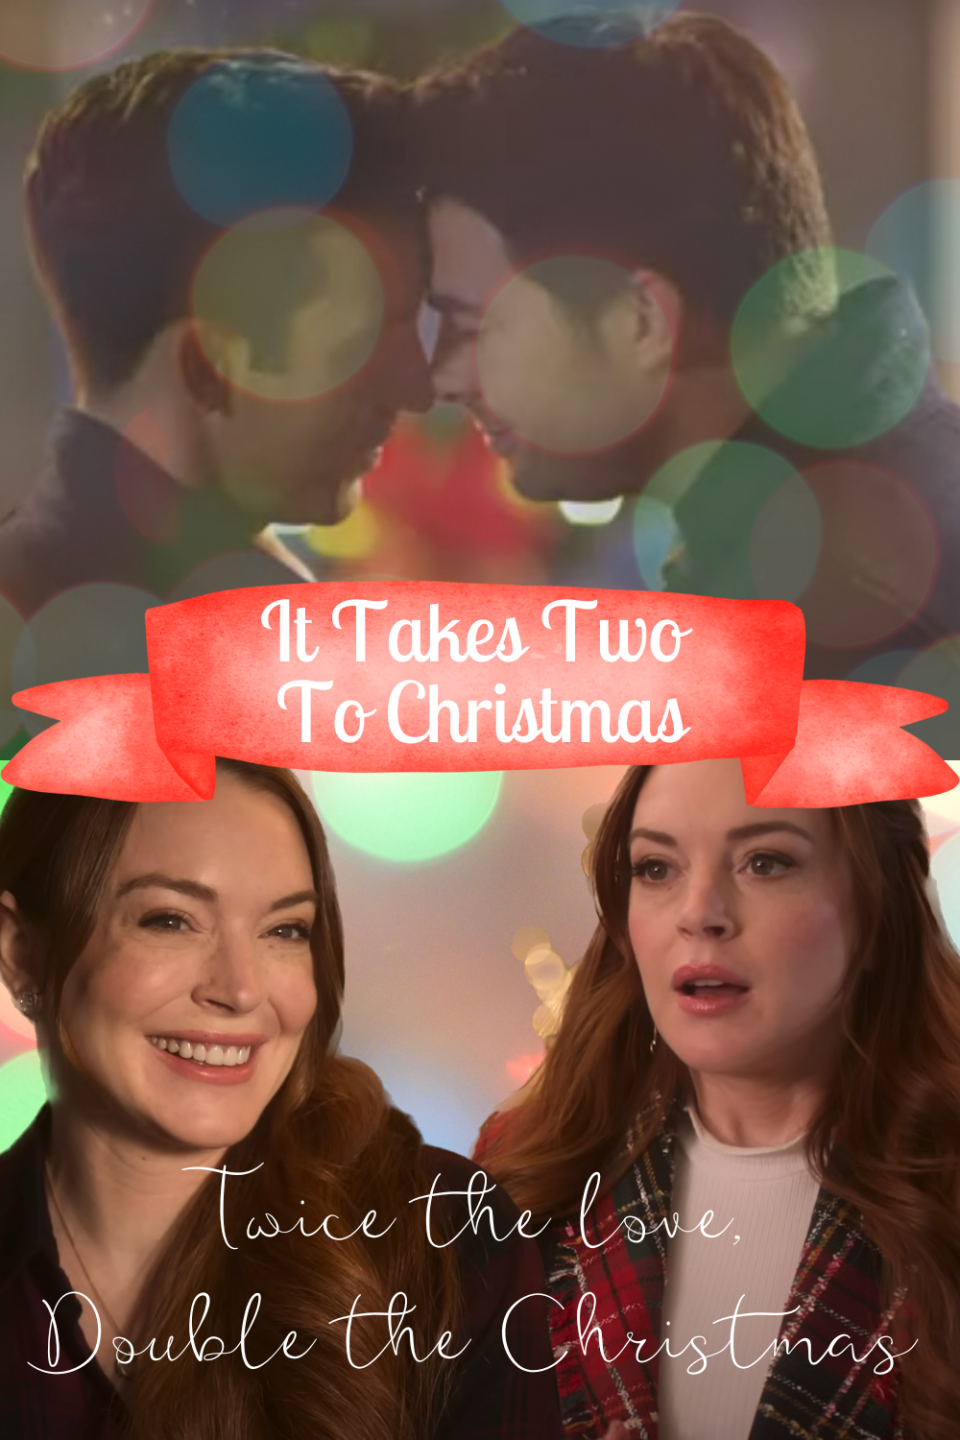 "It takes Two to Christmas"